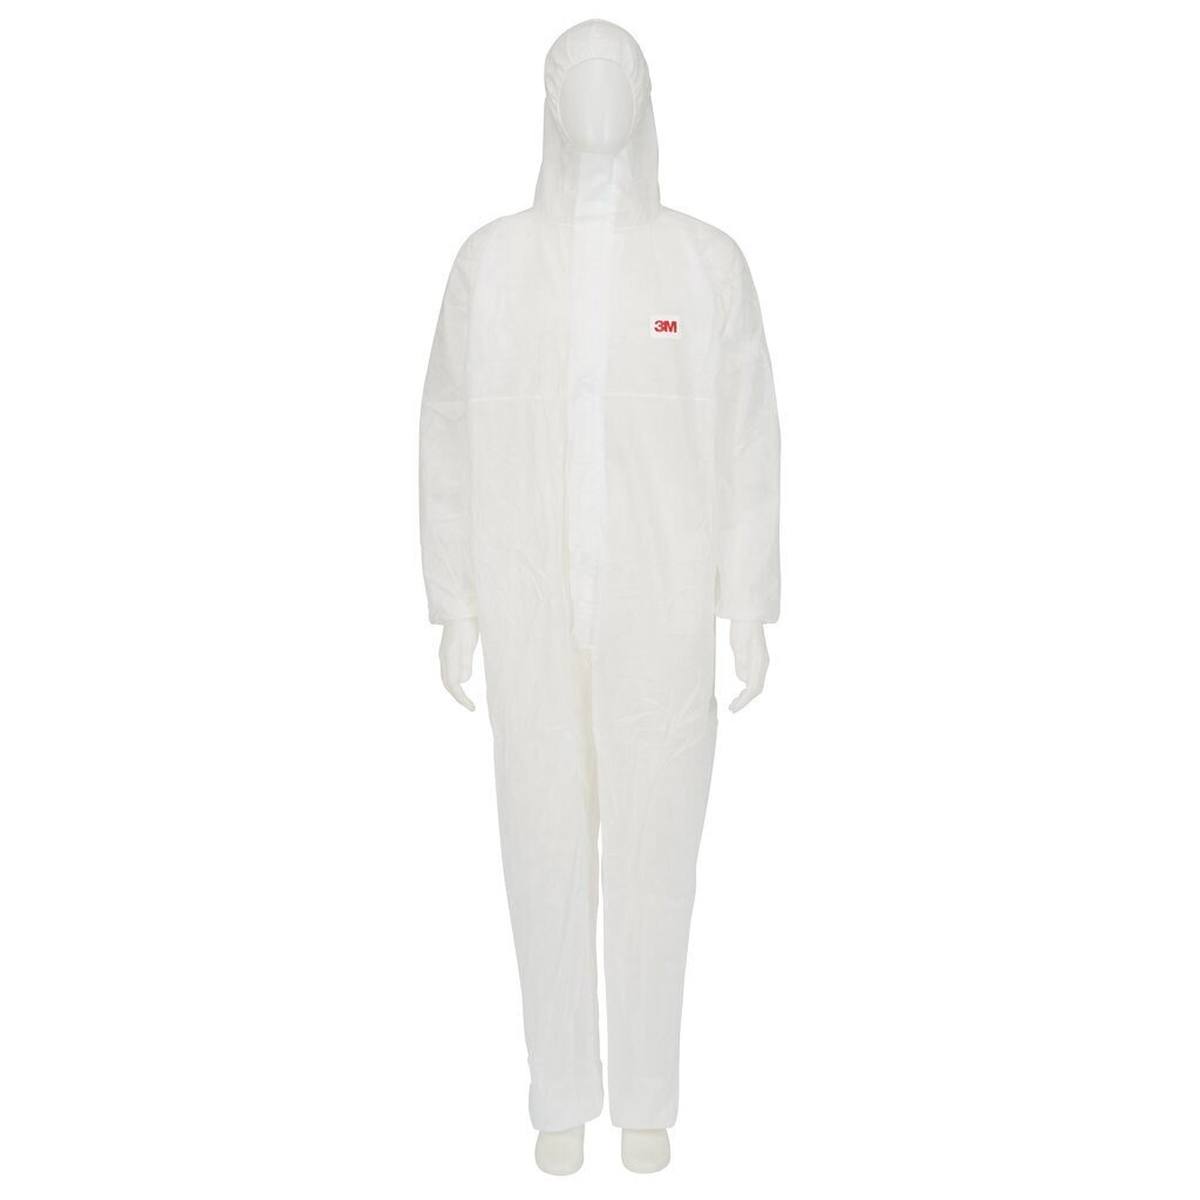 3M 4500 W coverall, white, CE, size XL, material polypropylene, elastic band finish